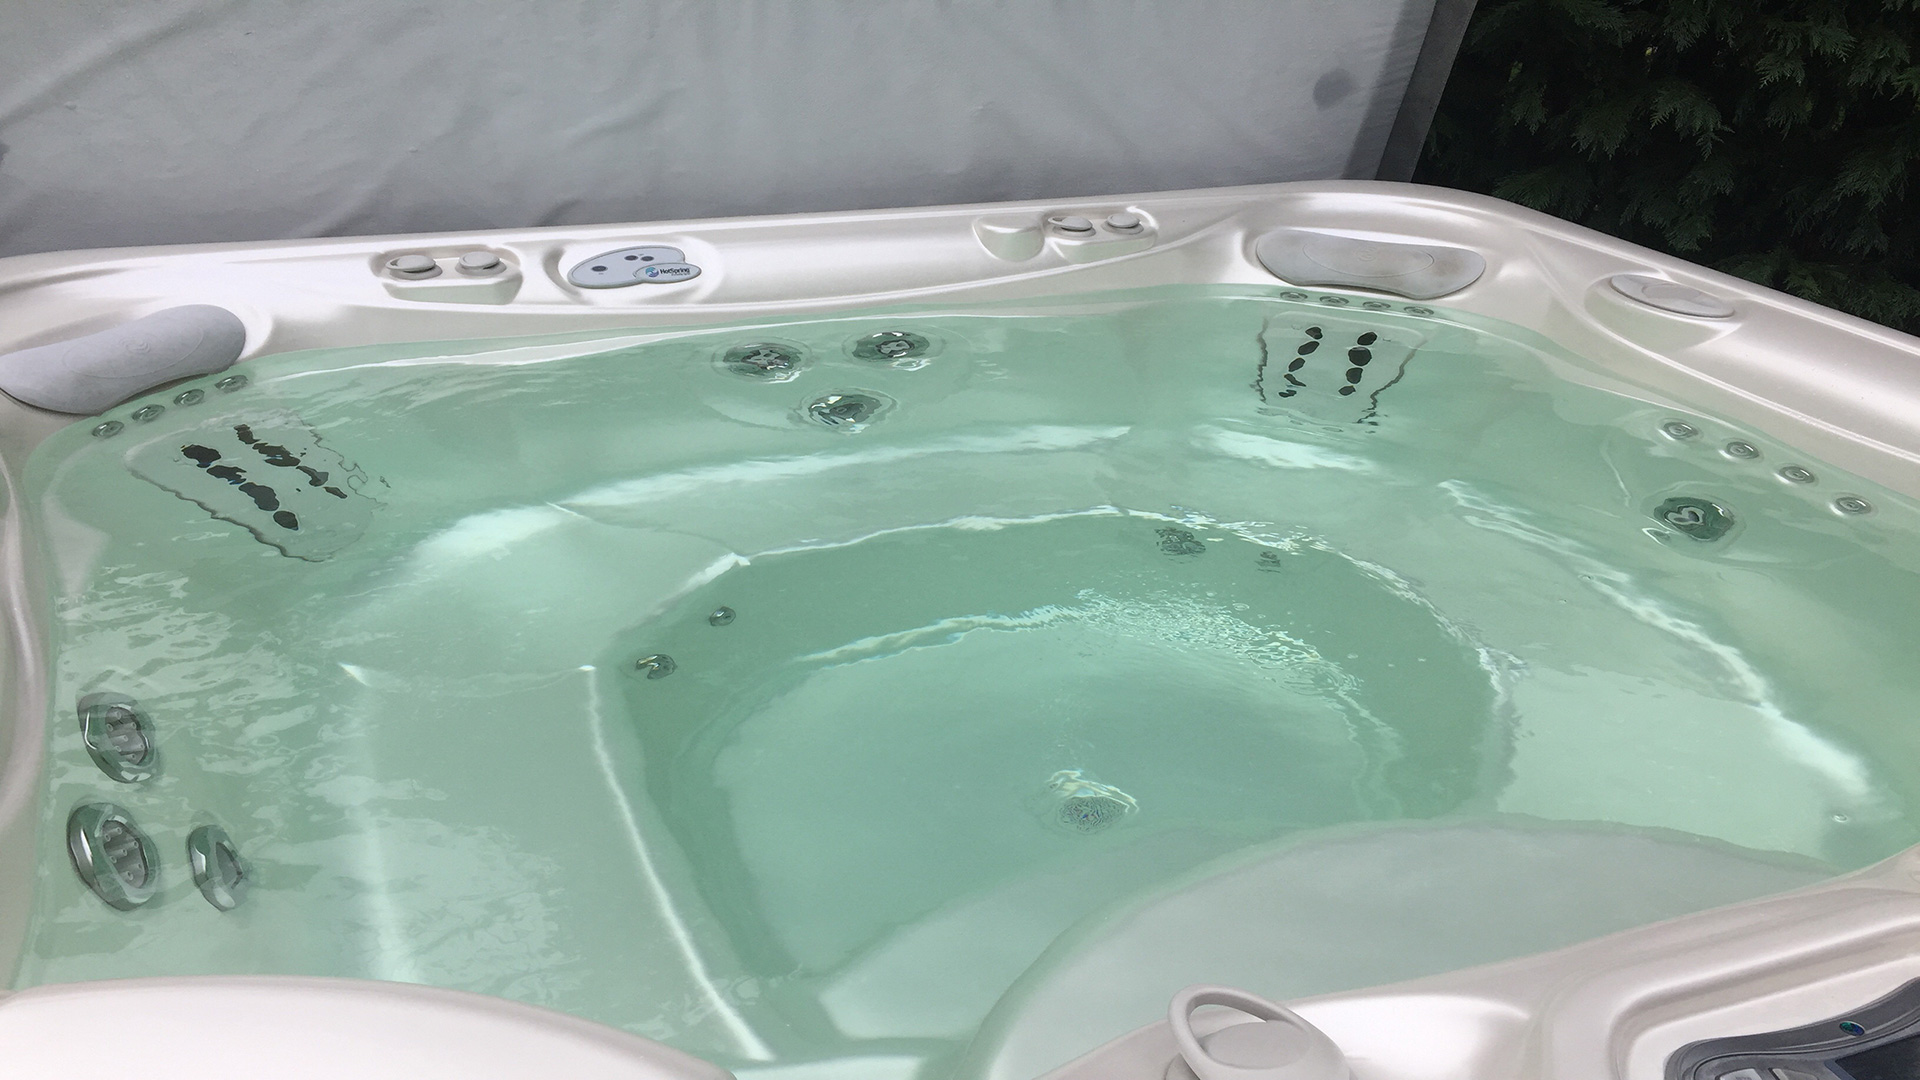 After Hot Tub Cleaning by AllSpa